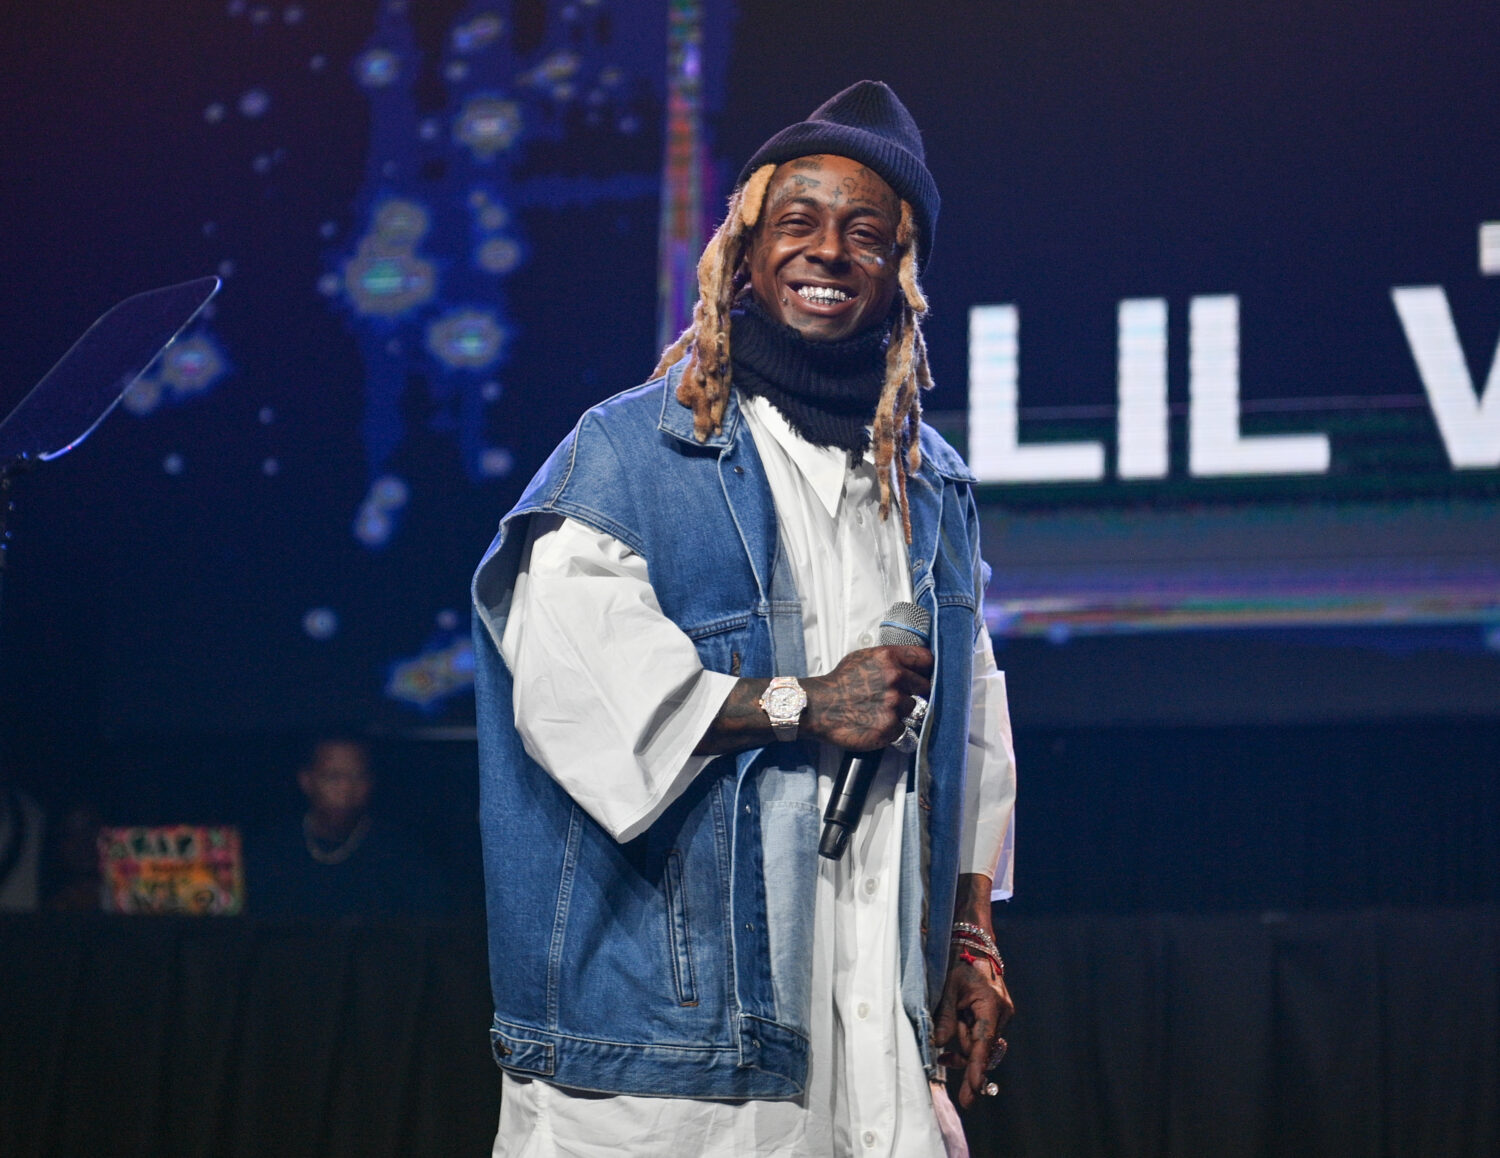 Lil Wayne Speaks On VMAs Performance For HipHop's 50th, Says He Was